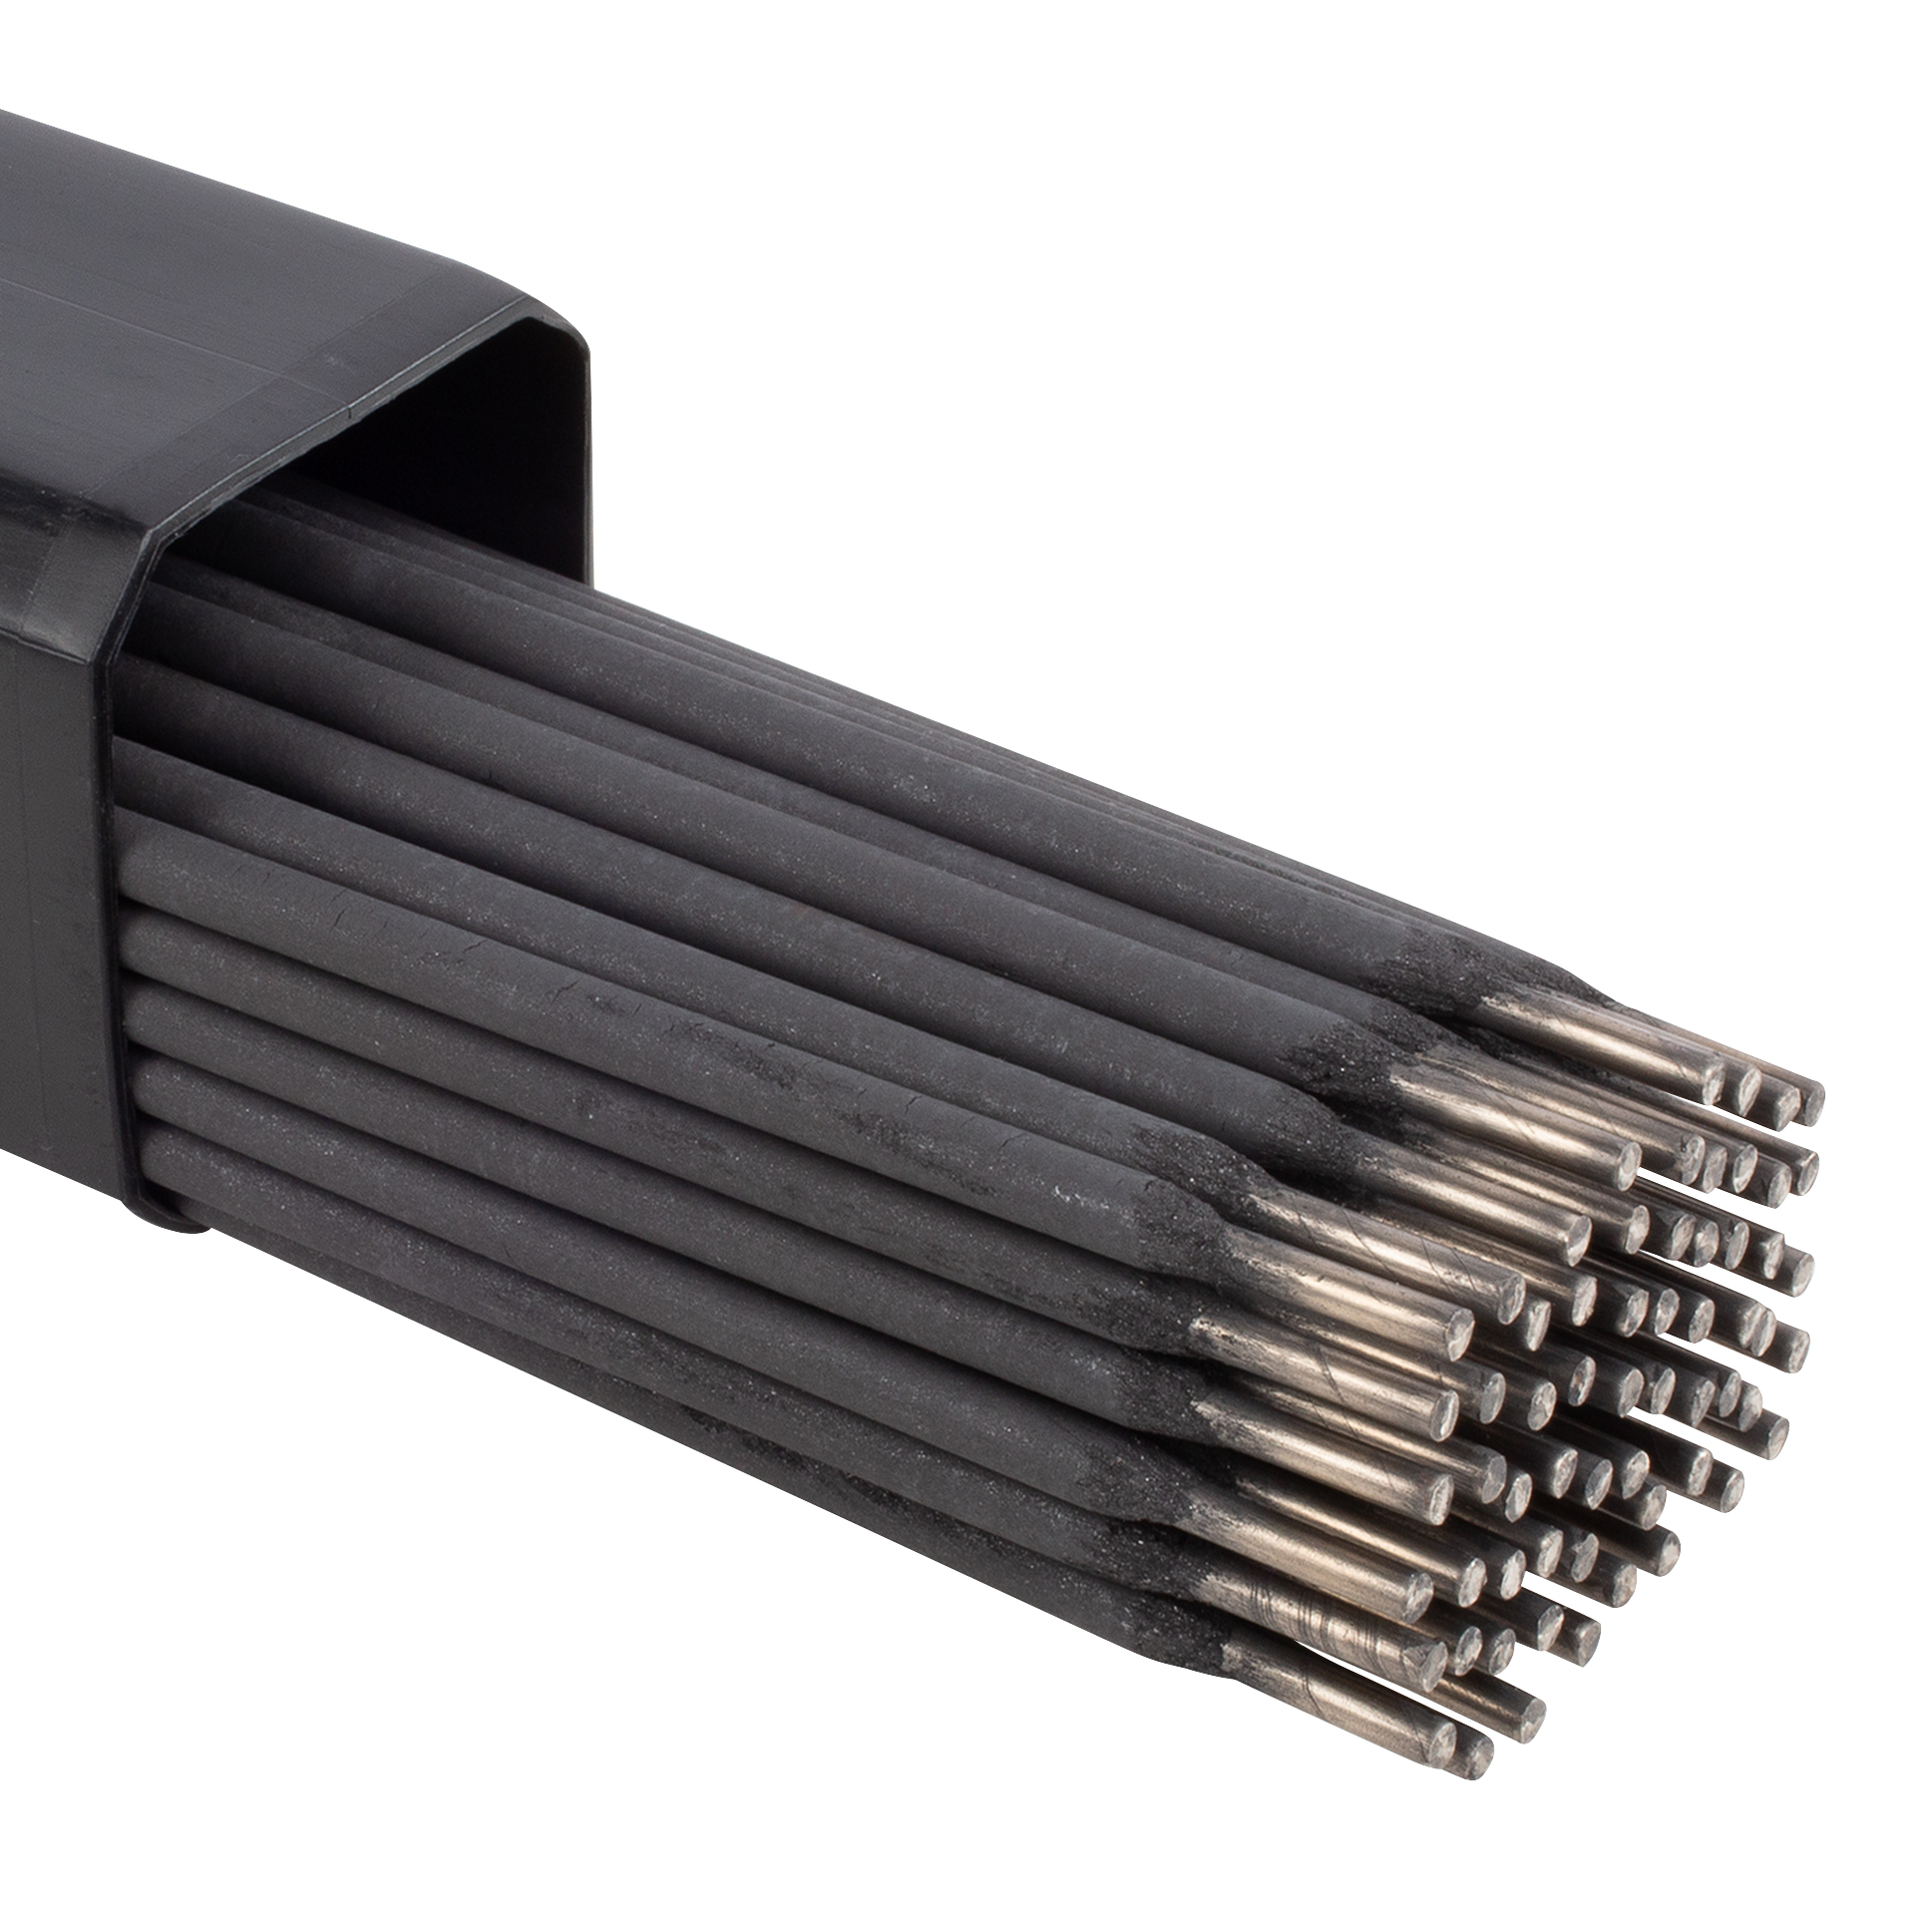 99% Nickel Cast Iron Electrode made from the highest quality nickel  available. 1/8 in. 5 lb.